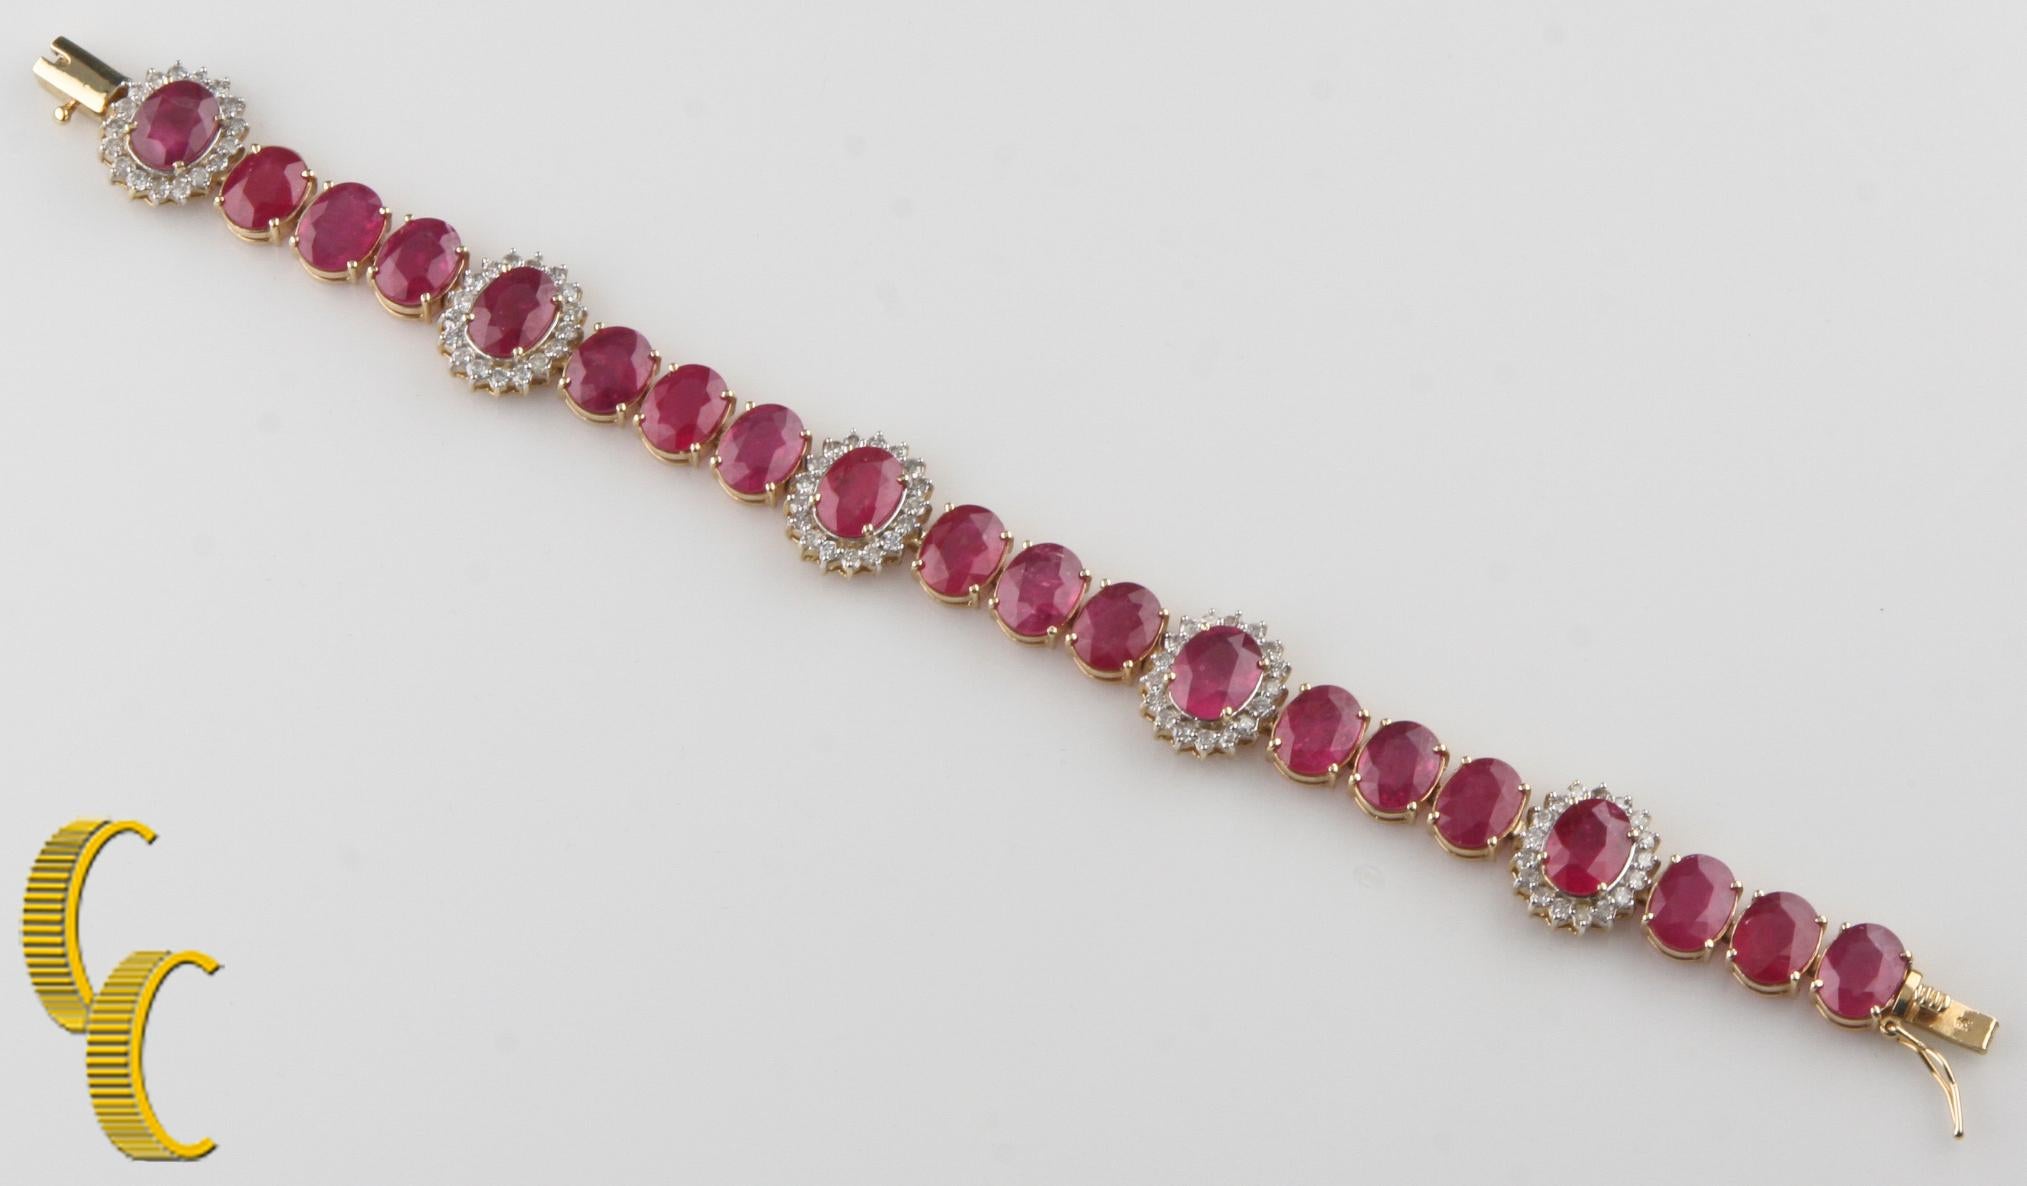 Oval Cut AIG Certified 47 Carat Ruby and Diamond Yellow Gold Bracelet